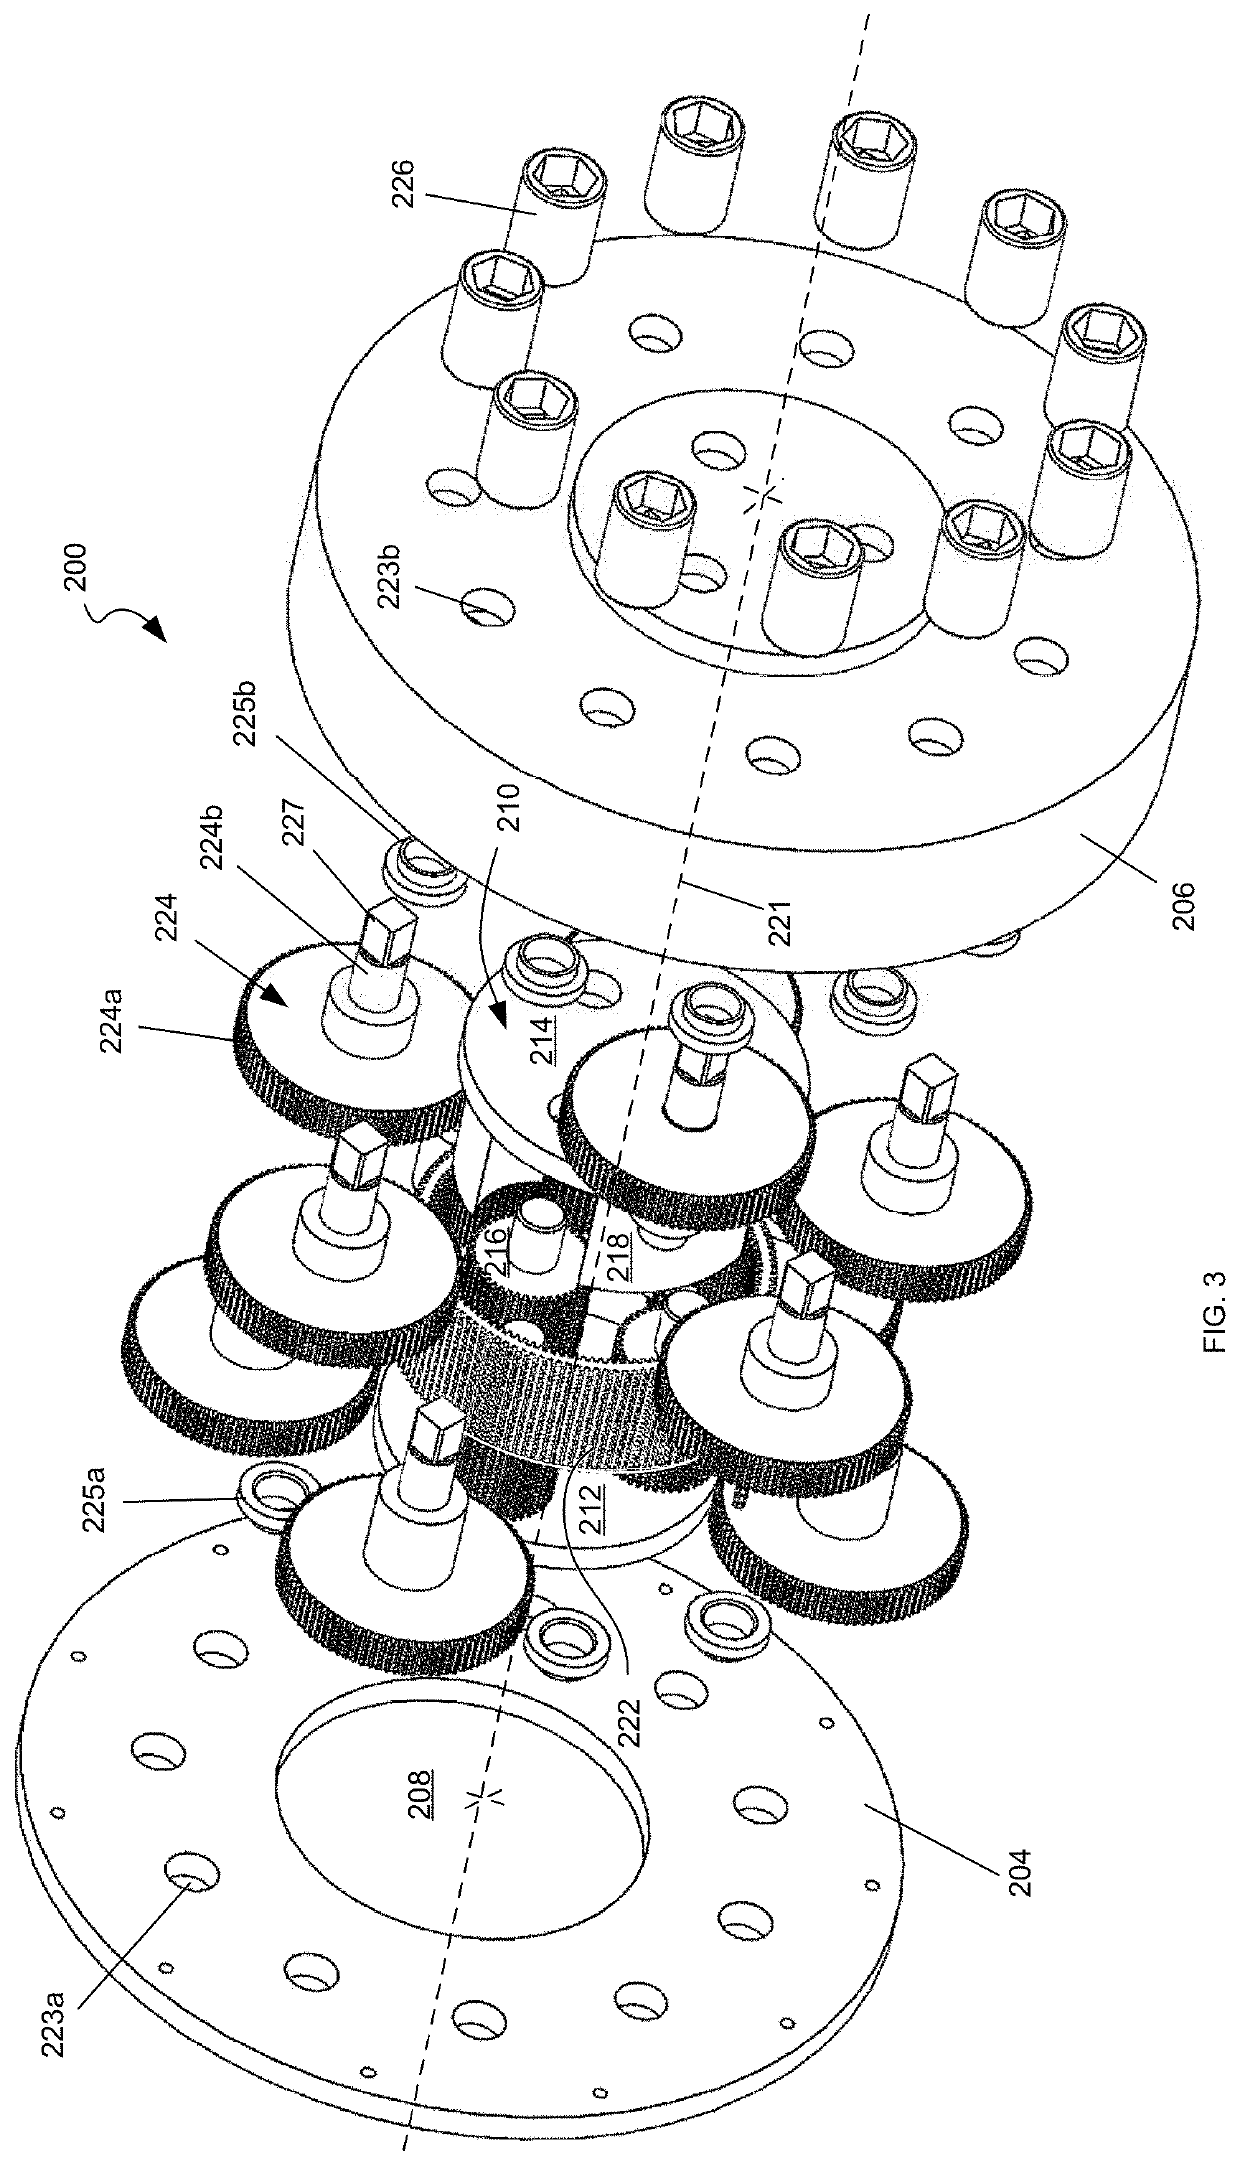 Apparatus for simultaneously applying torque to a plurality of jackbolts of a multi jackbolt tensioner